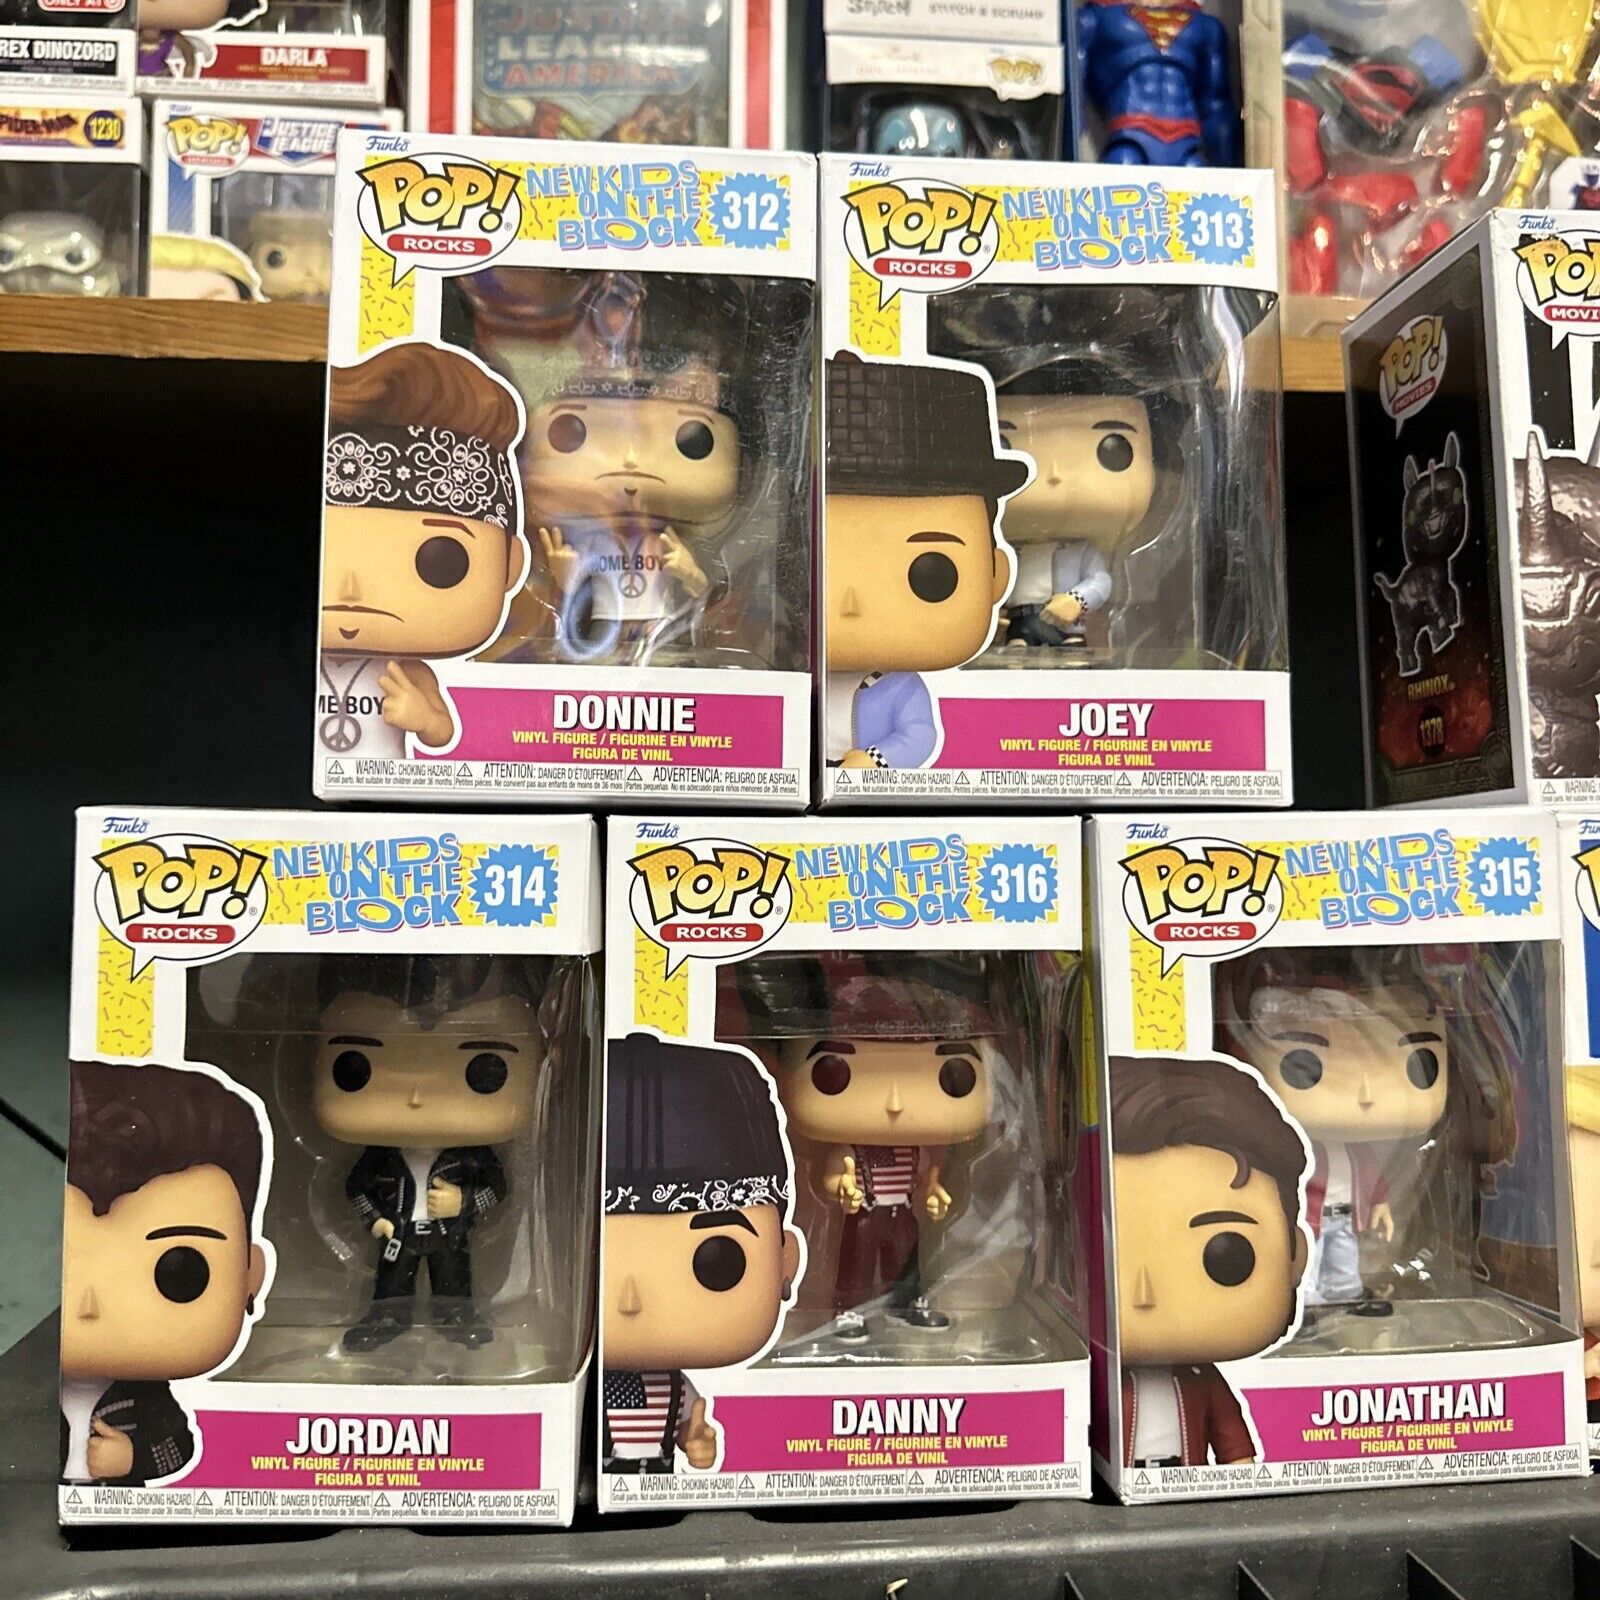 All 5 Members Of NKOTB Funko Pops NIB. All In Excellent Condition